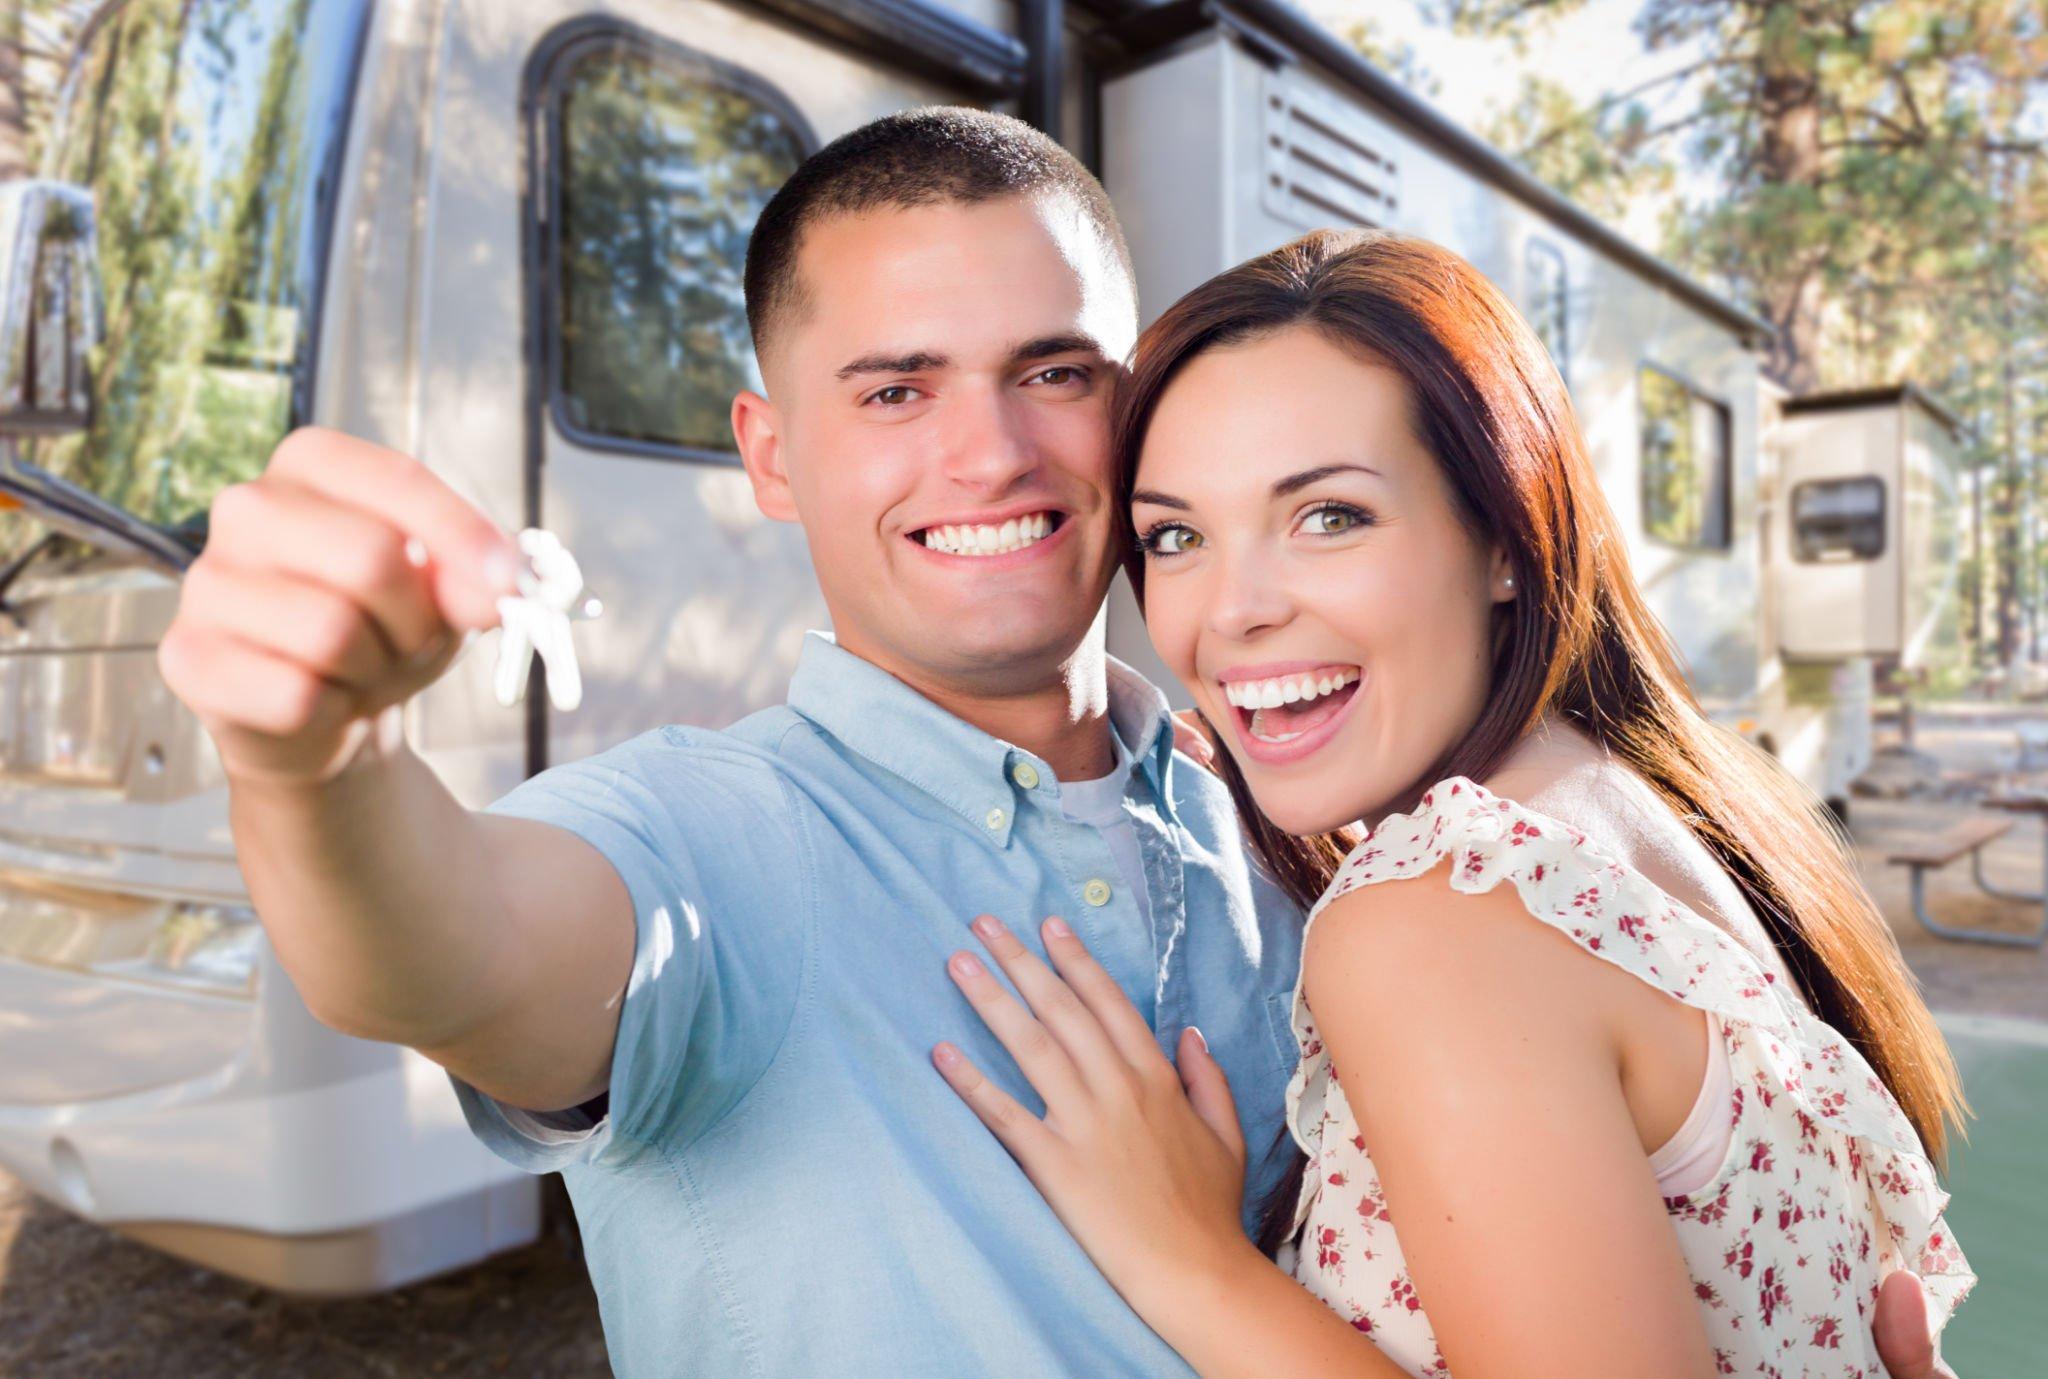 Are You Interested to Buy a Motorhome?